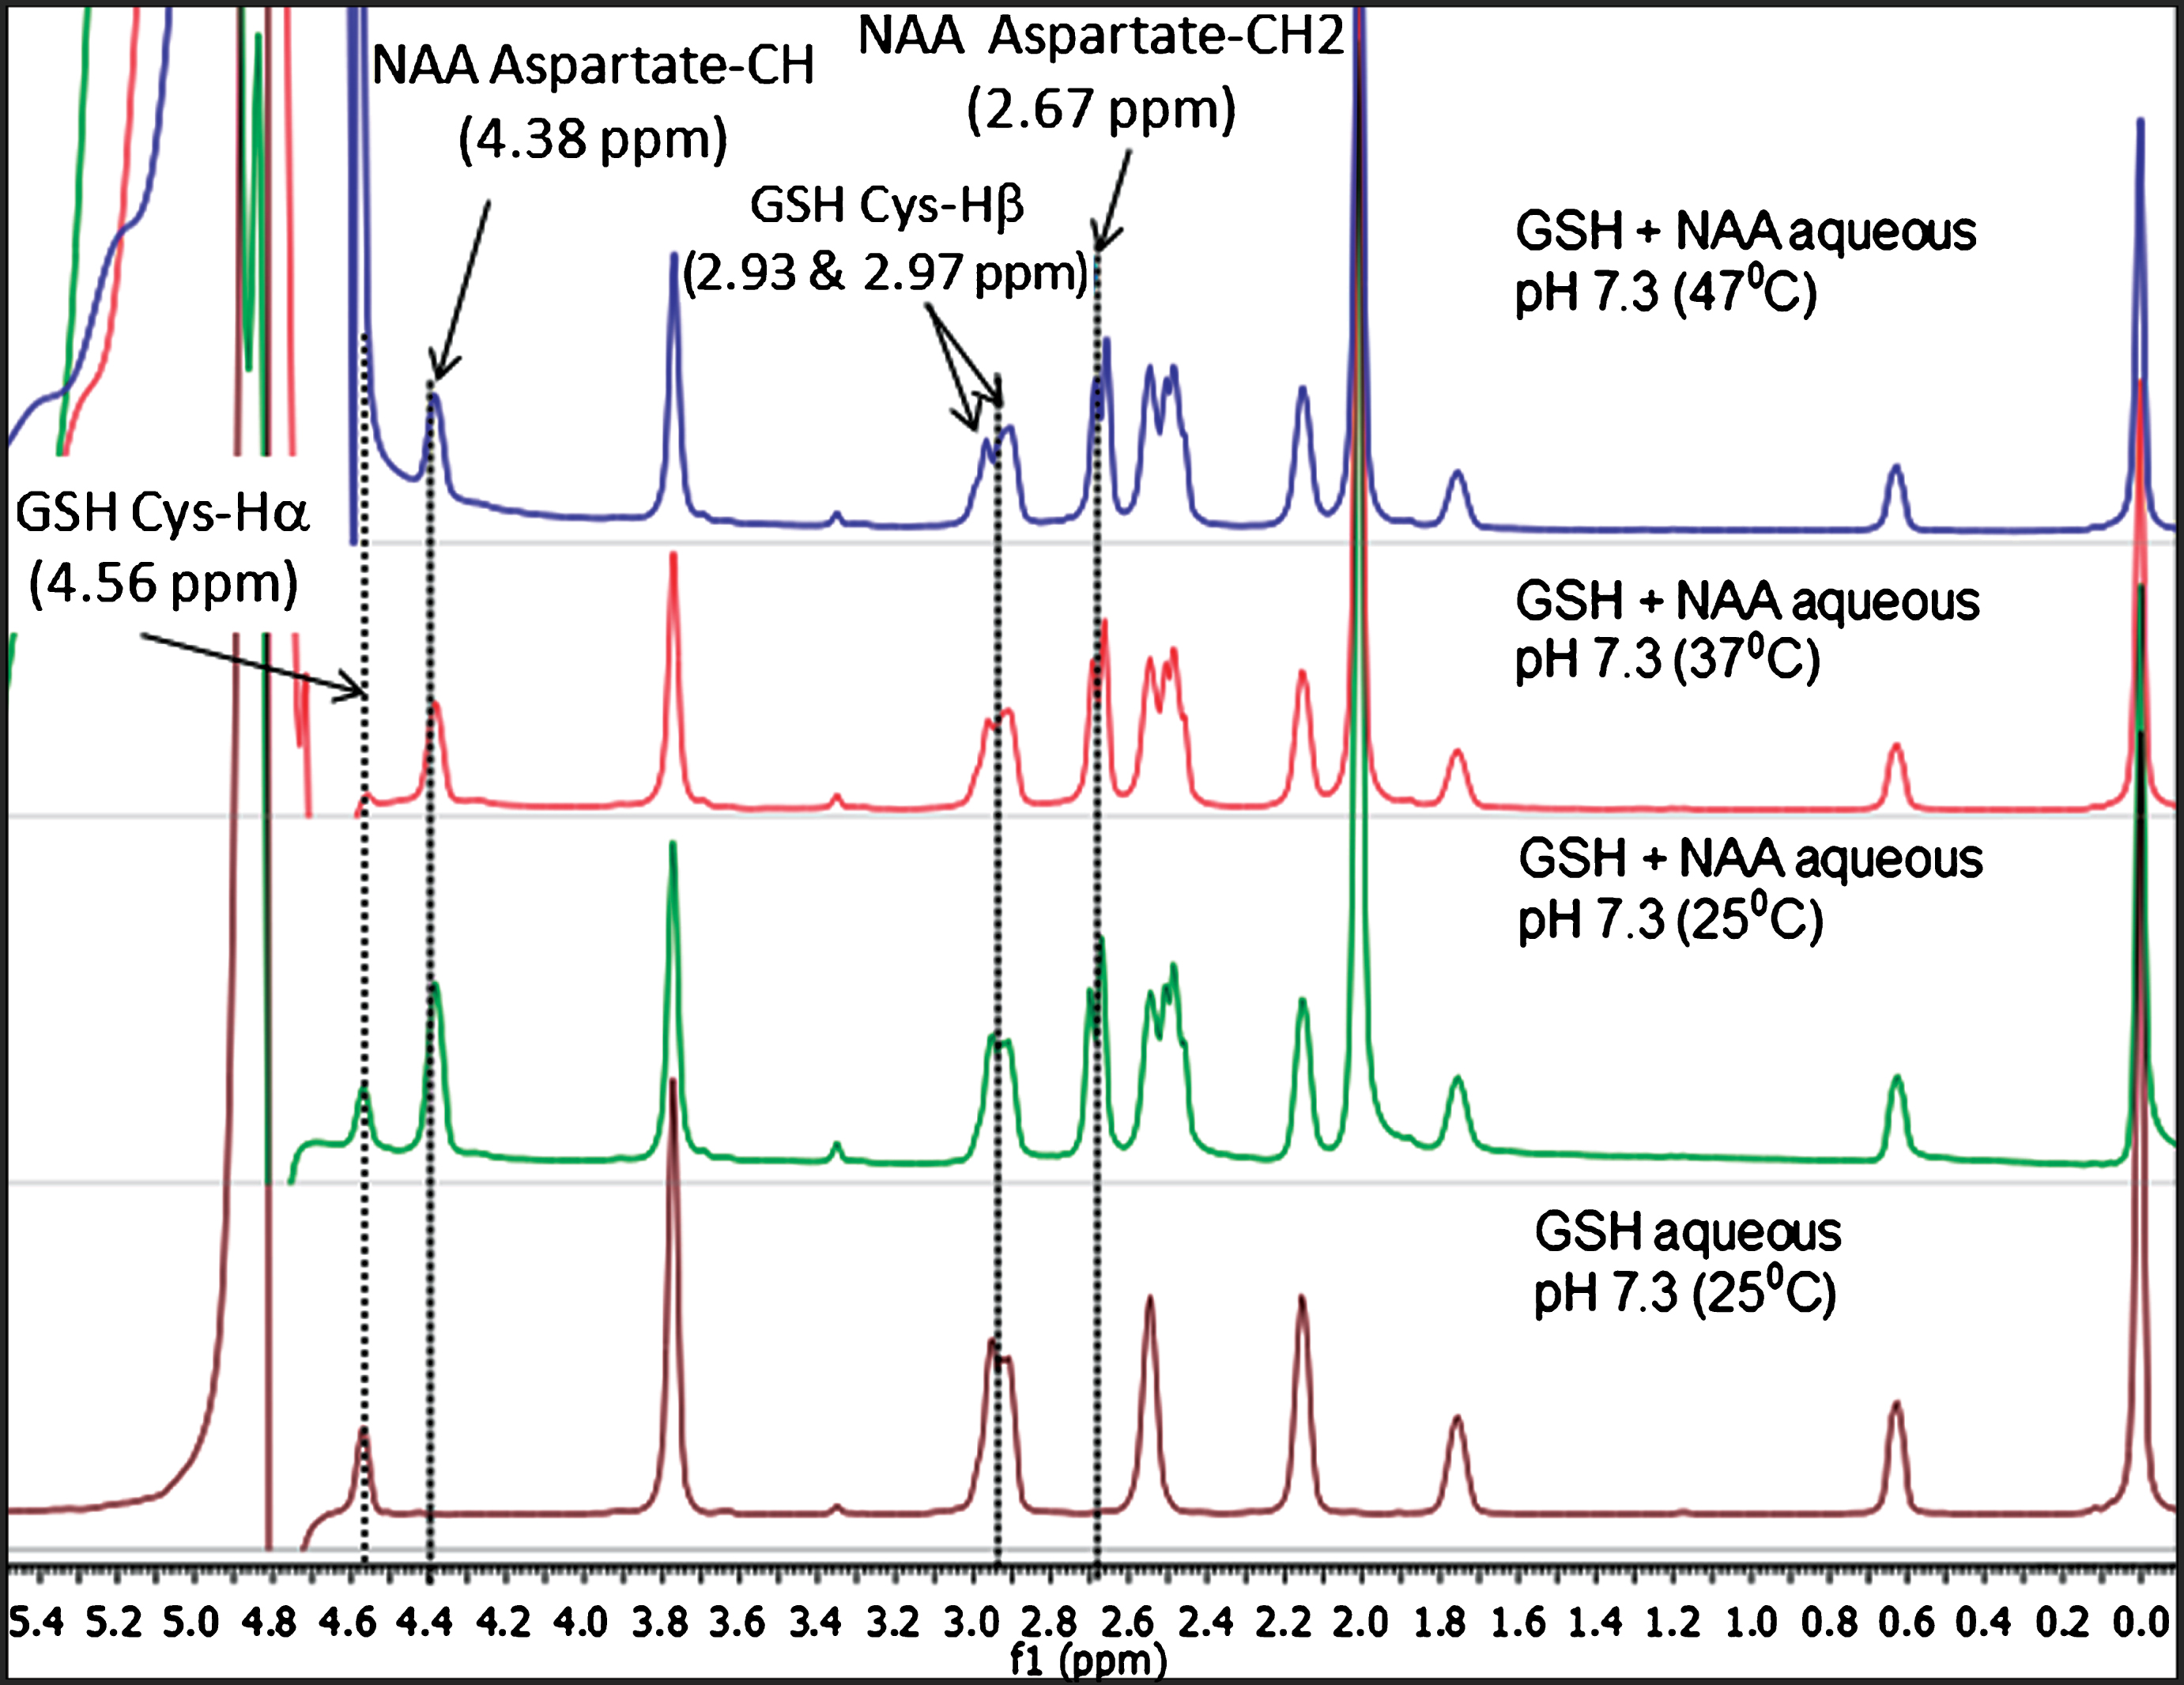 Comparison of relative peak positions of GSH and GSH+NAA samples in phosphate buffer saline (PBS) using NMR study over different temperatures. (A) 1D NMR for GSH in PBS solution at 25°C, (B) 1D NMR for GSH+NAA PBS solution at 25°C, (C) GSH+NAA in PBS solution 37°C and, (D) GSH+NAA in PBS solution at 47°C using 500 MHz NMR.